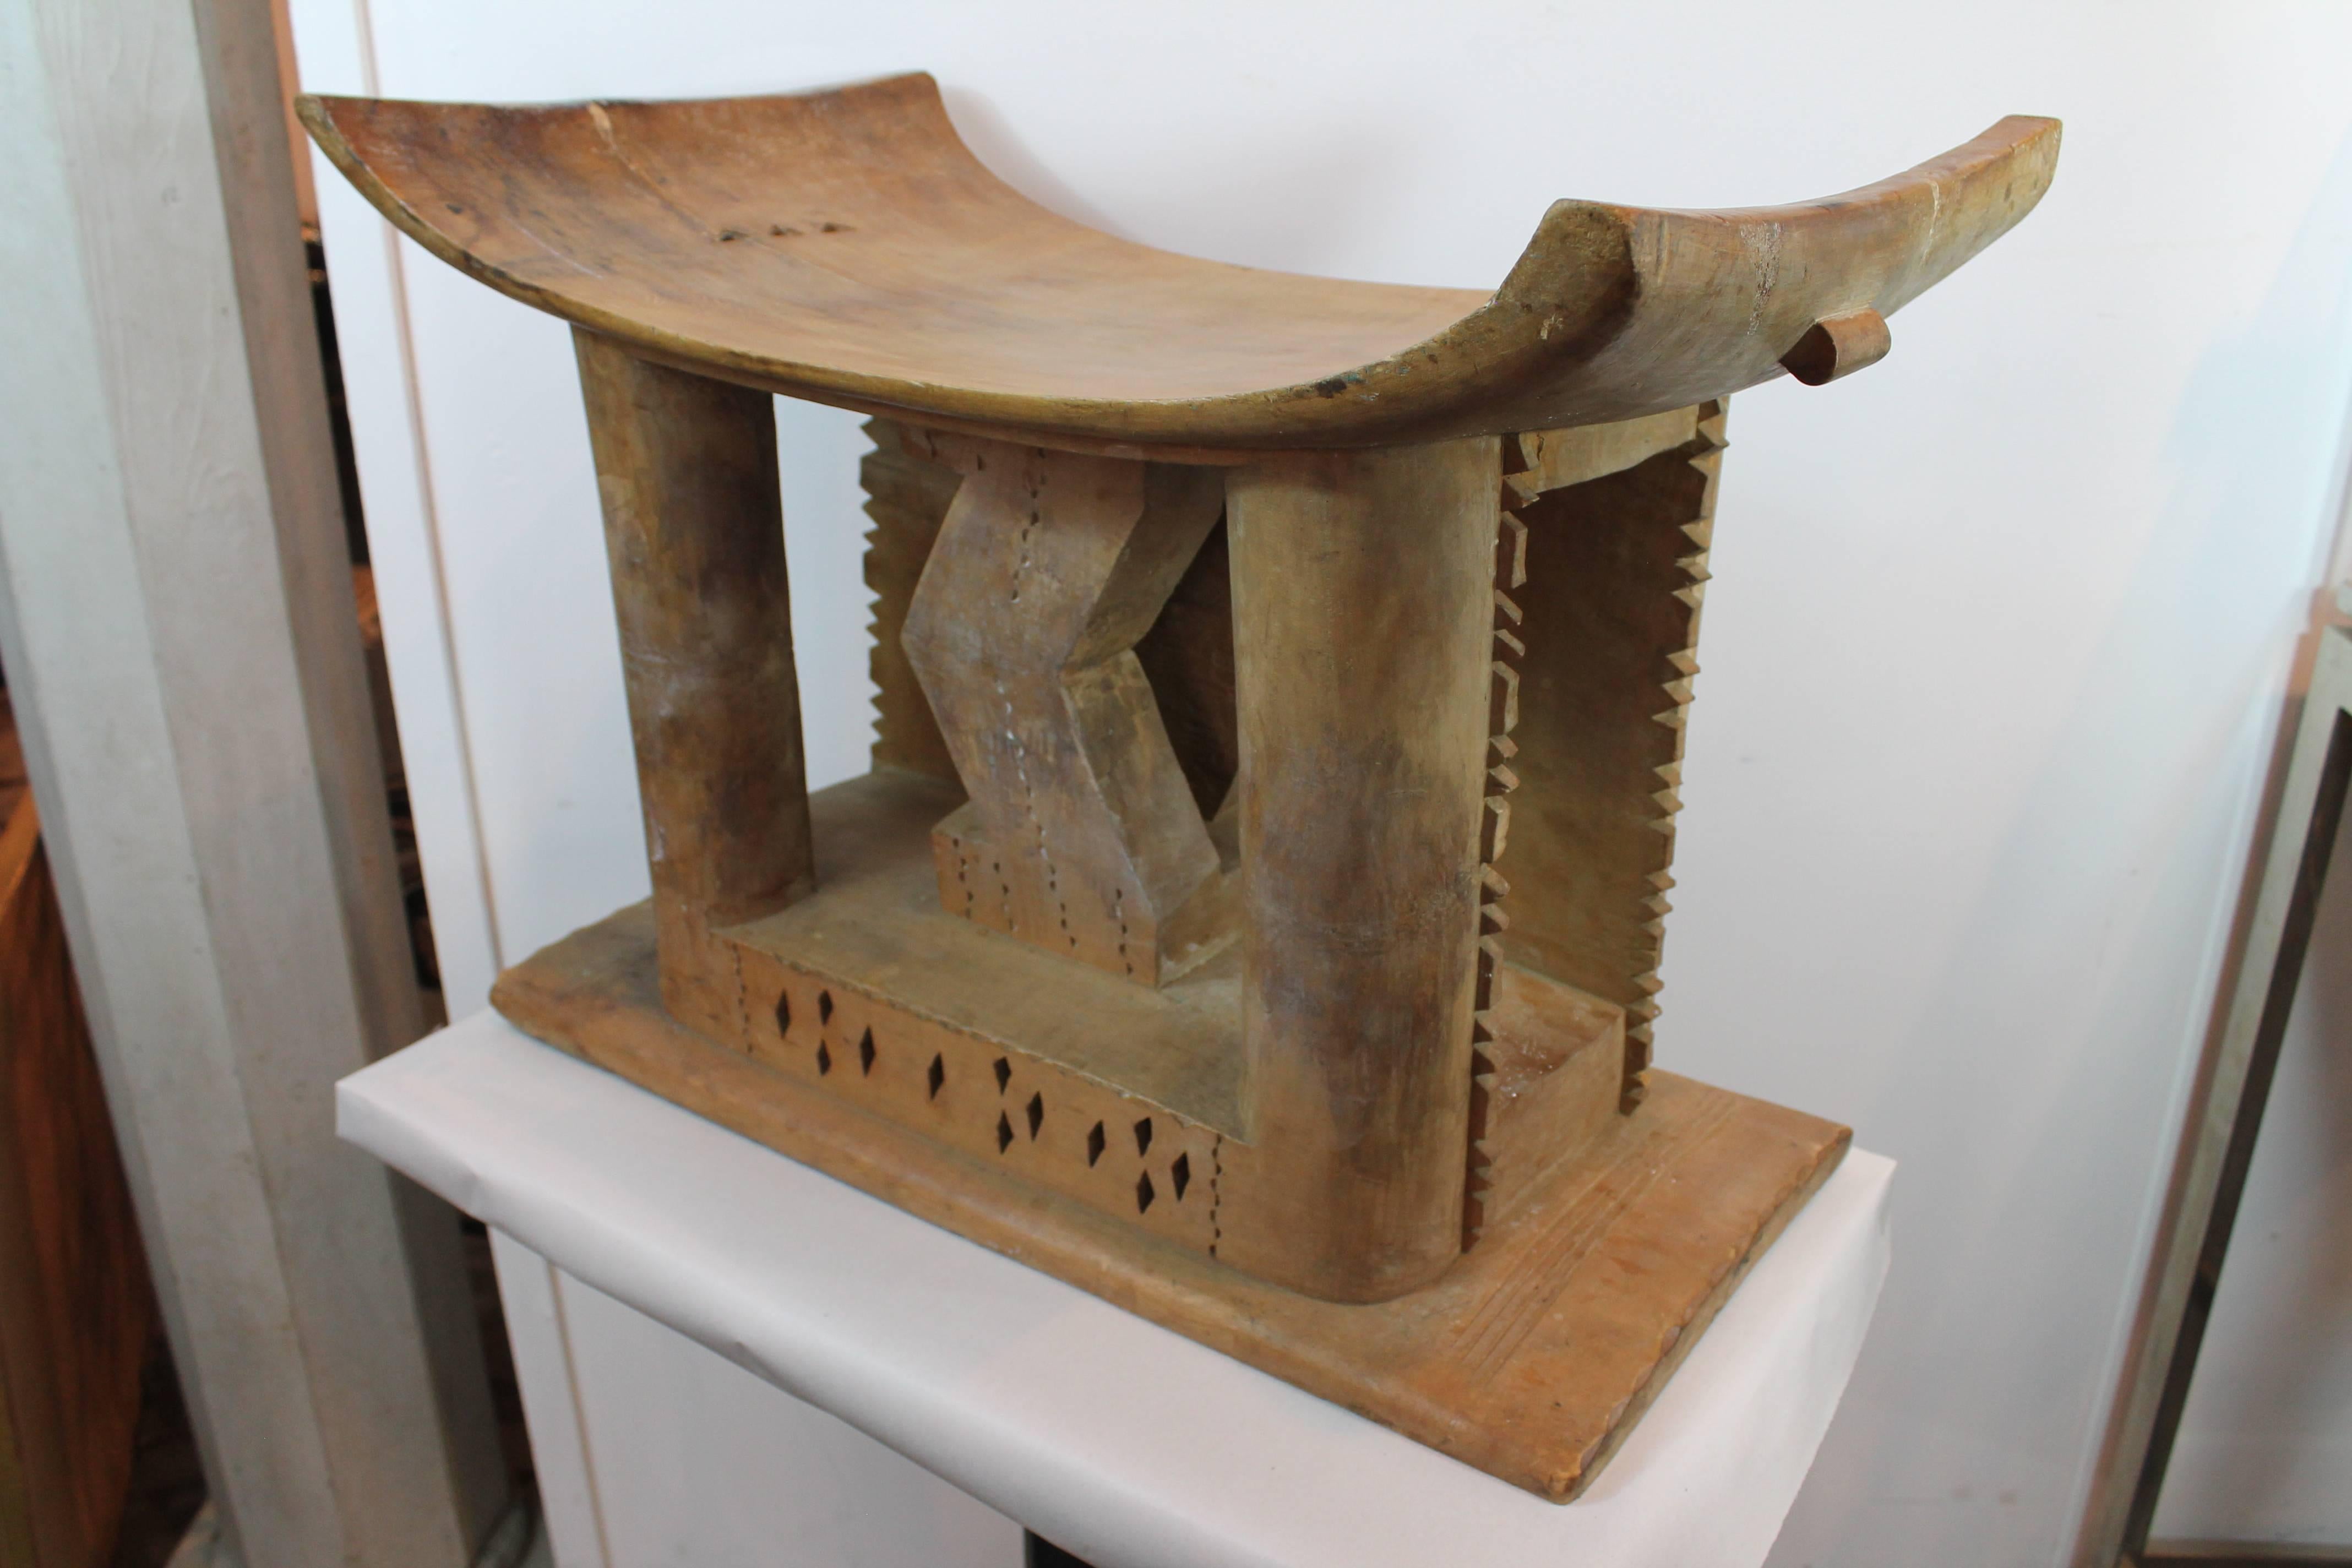 Ashanti stool from Ghana, carved from a single piece of wood.
Wonderful carved details of triangular voids and a reverse zig zag center structural design. Use as a low end table, stand or seat.